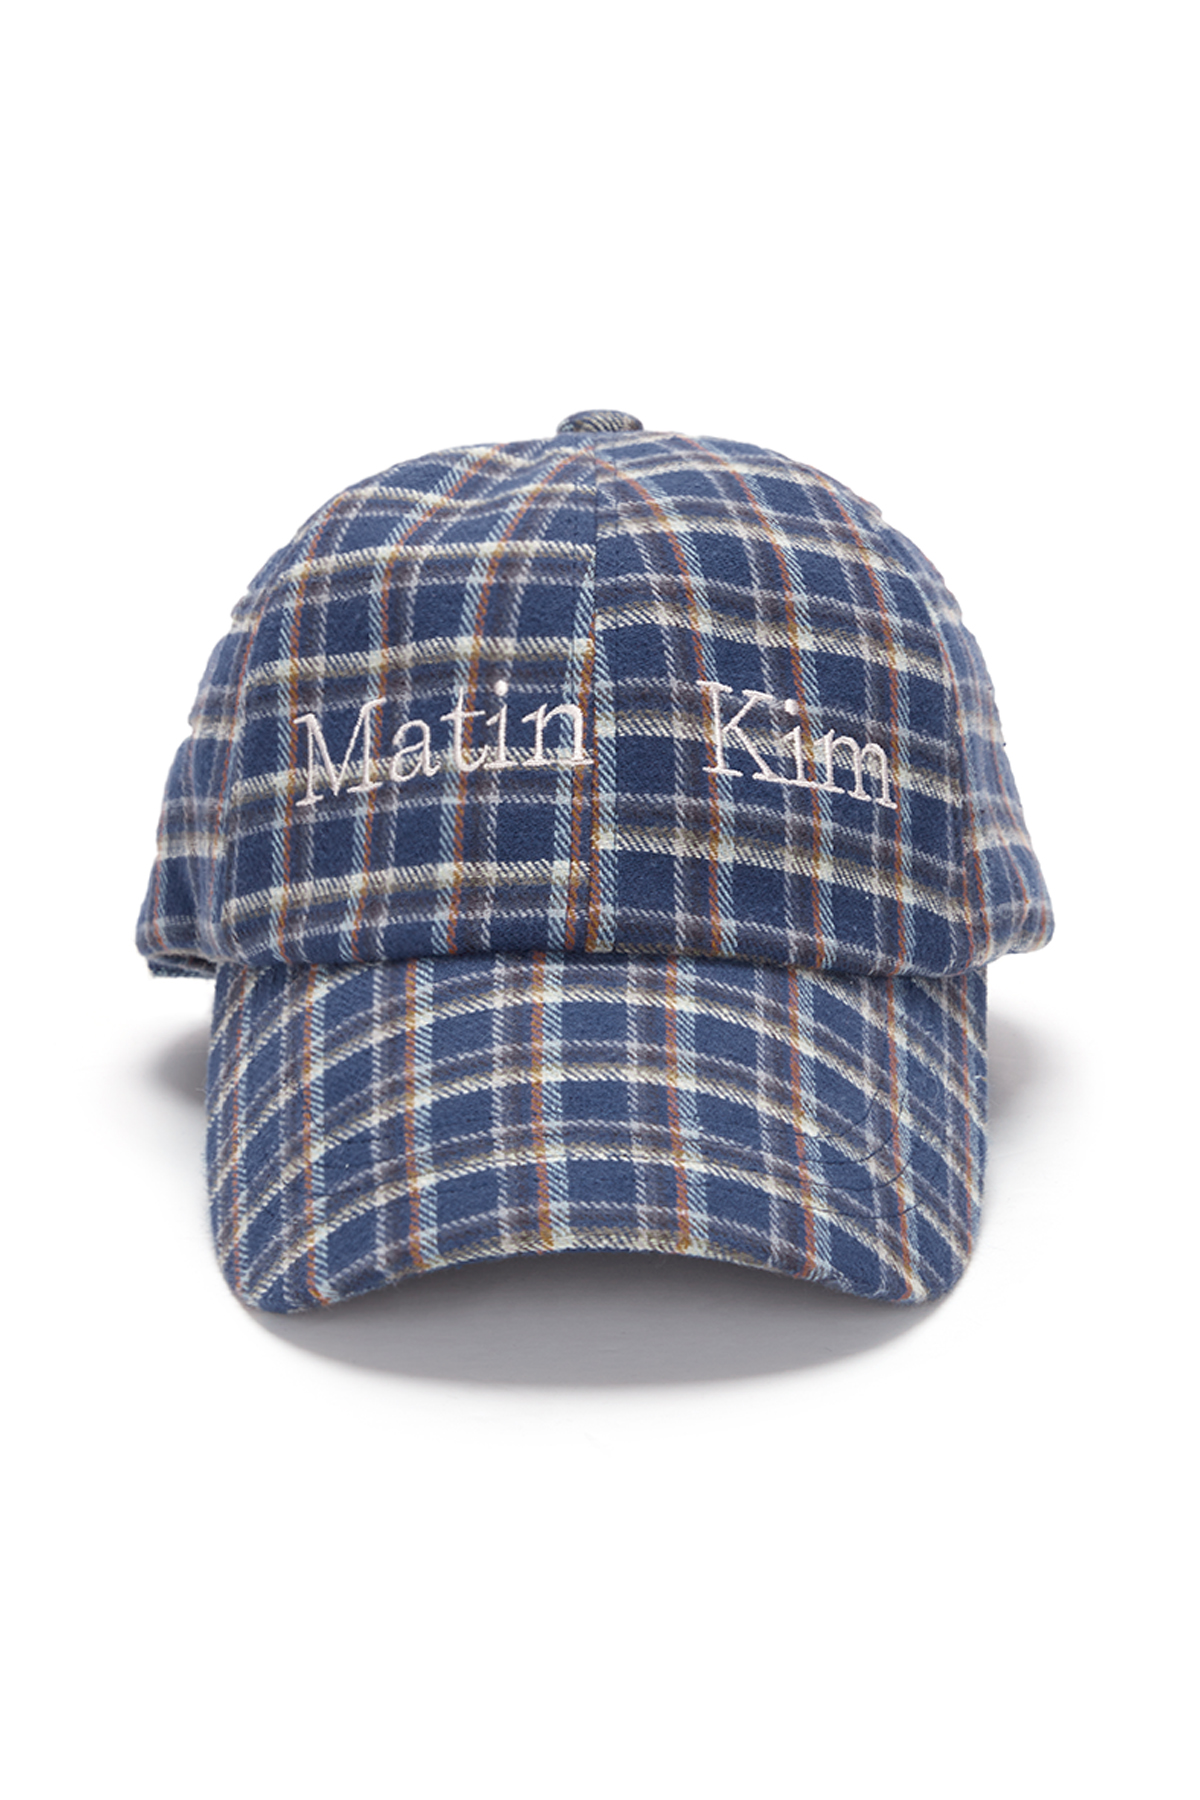 CHECK PATTERN BALL CAP IN BLUE